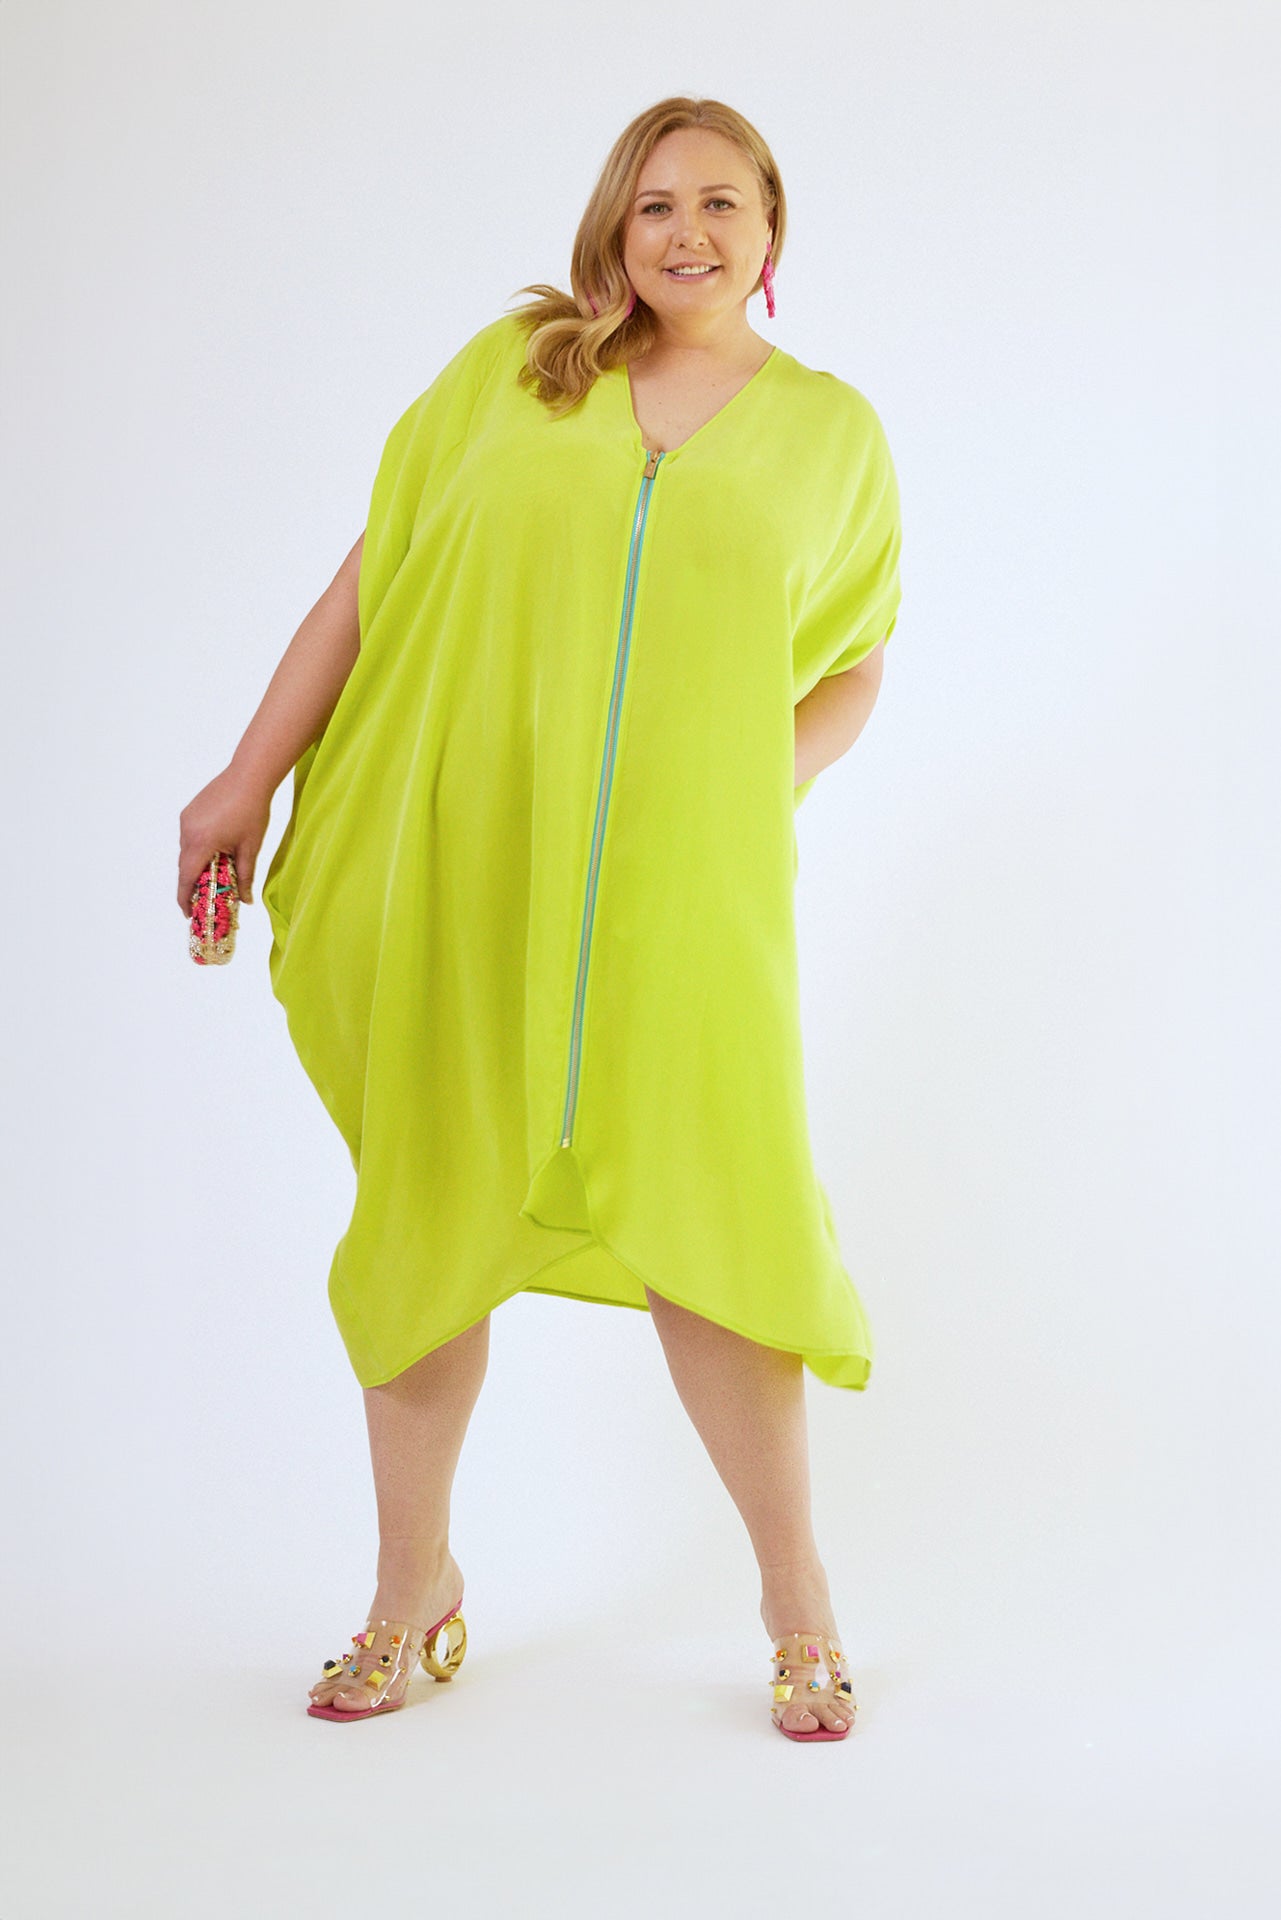 front view of woman wearing bright yellow kaftan duster with front zipper made from recycled materials 6